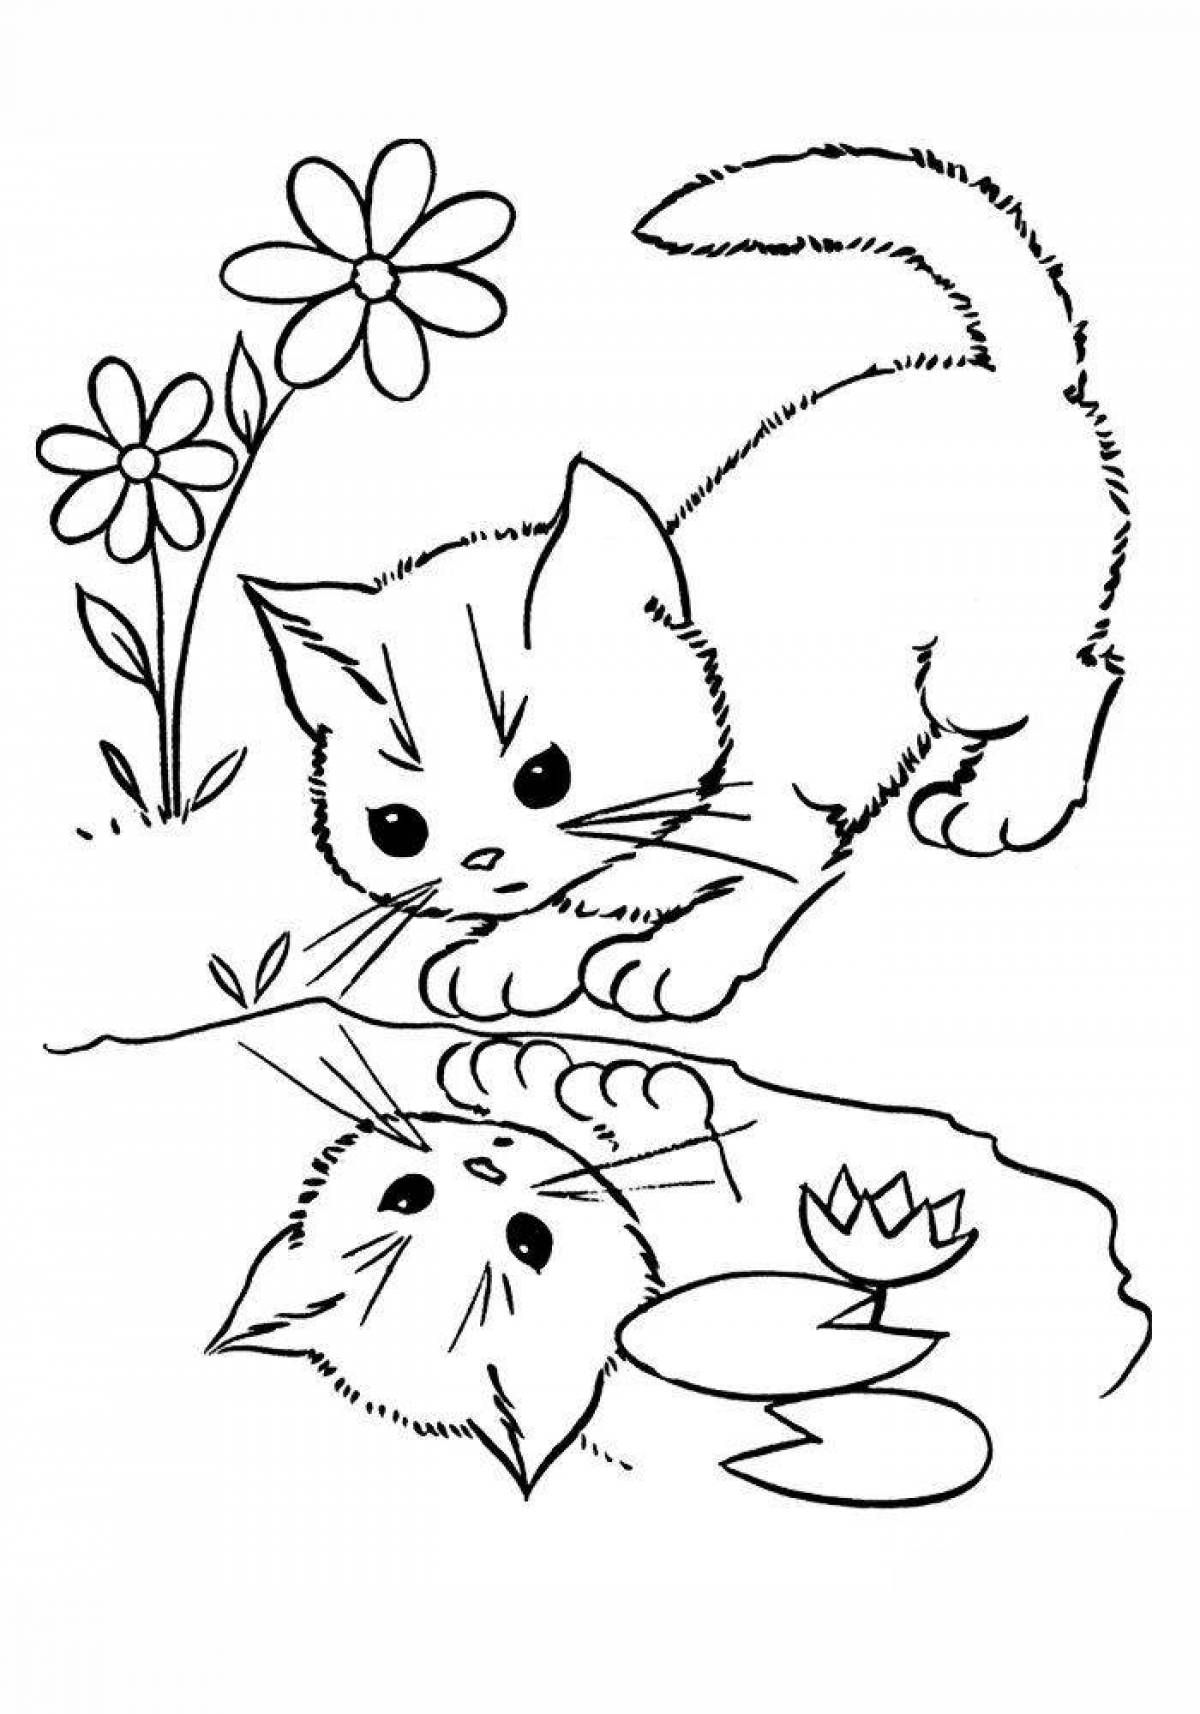 Live coloring of a kitten for children 3-4 years old